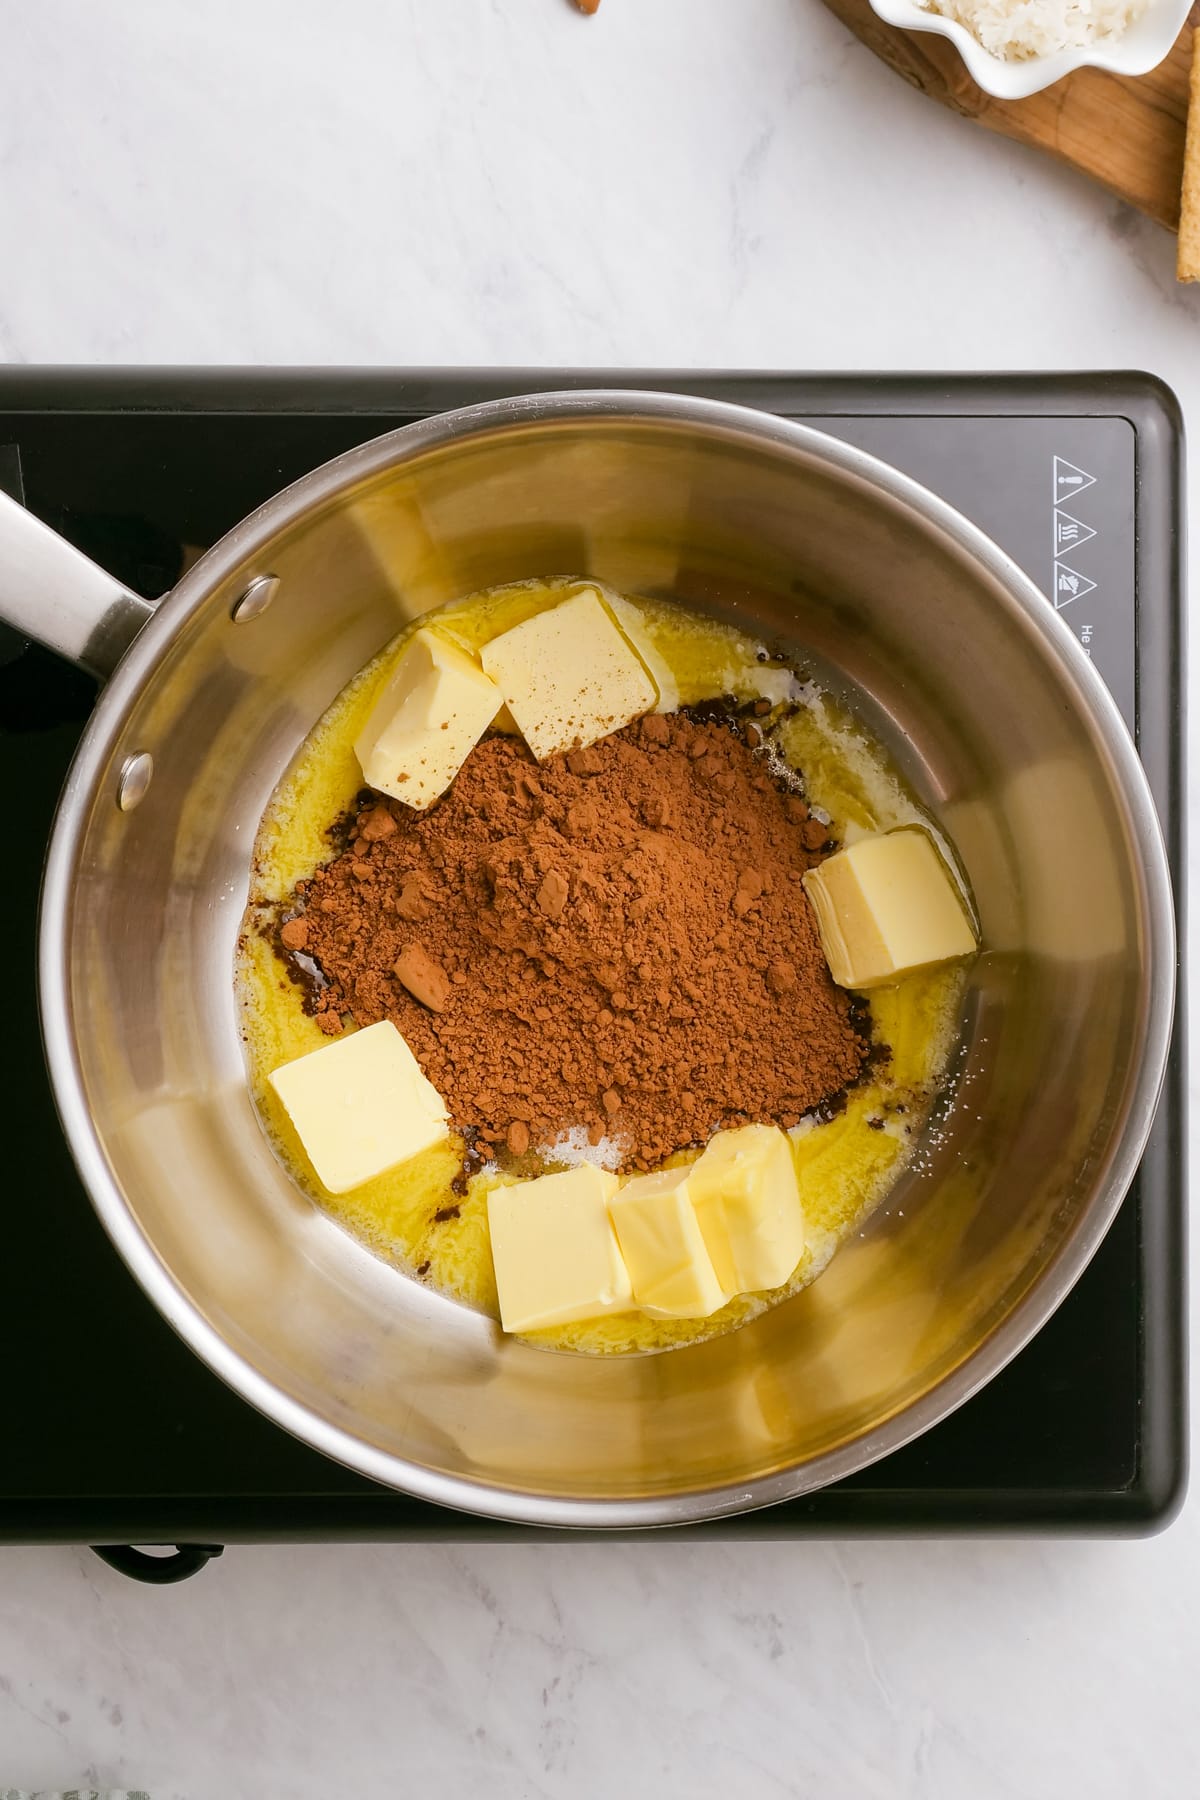 butter cubes and cocoa powder in a pan on the stove